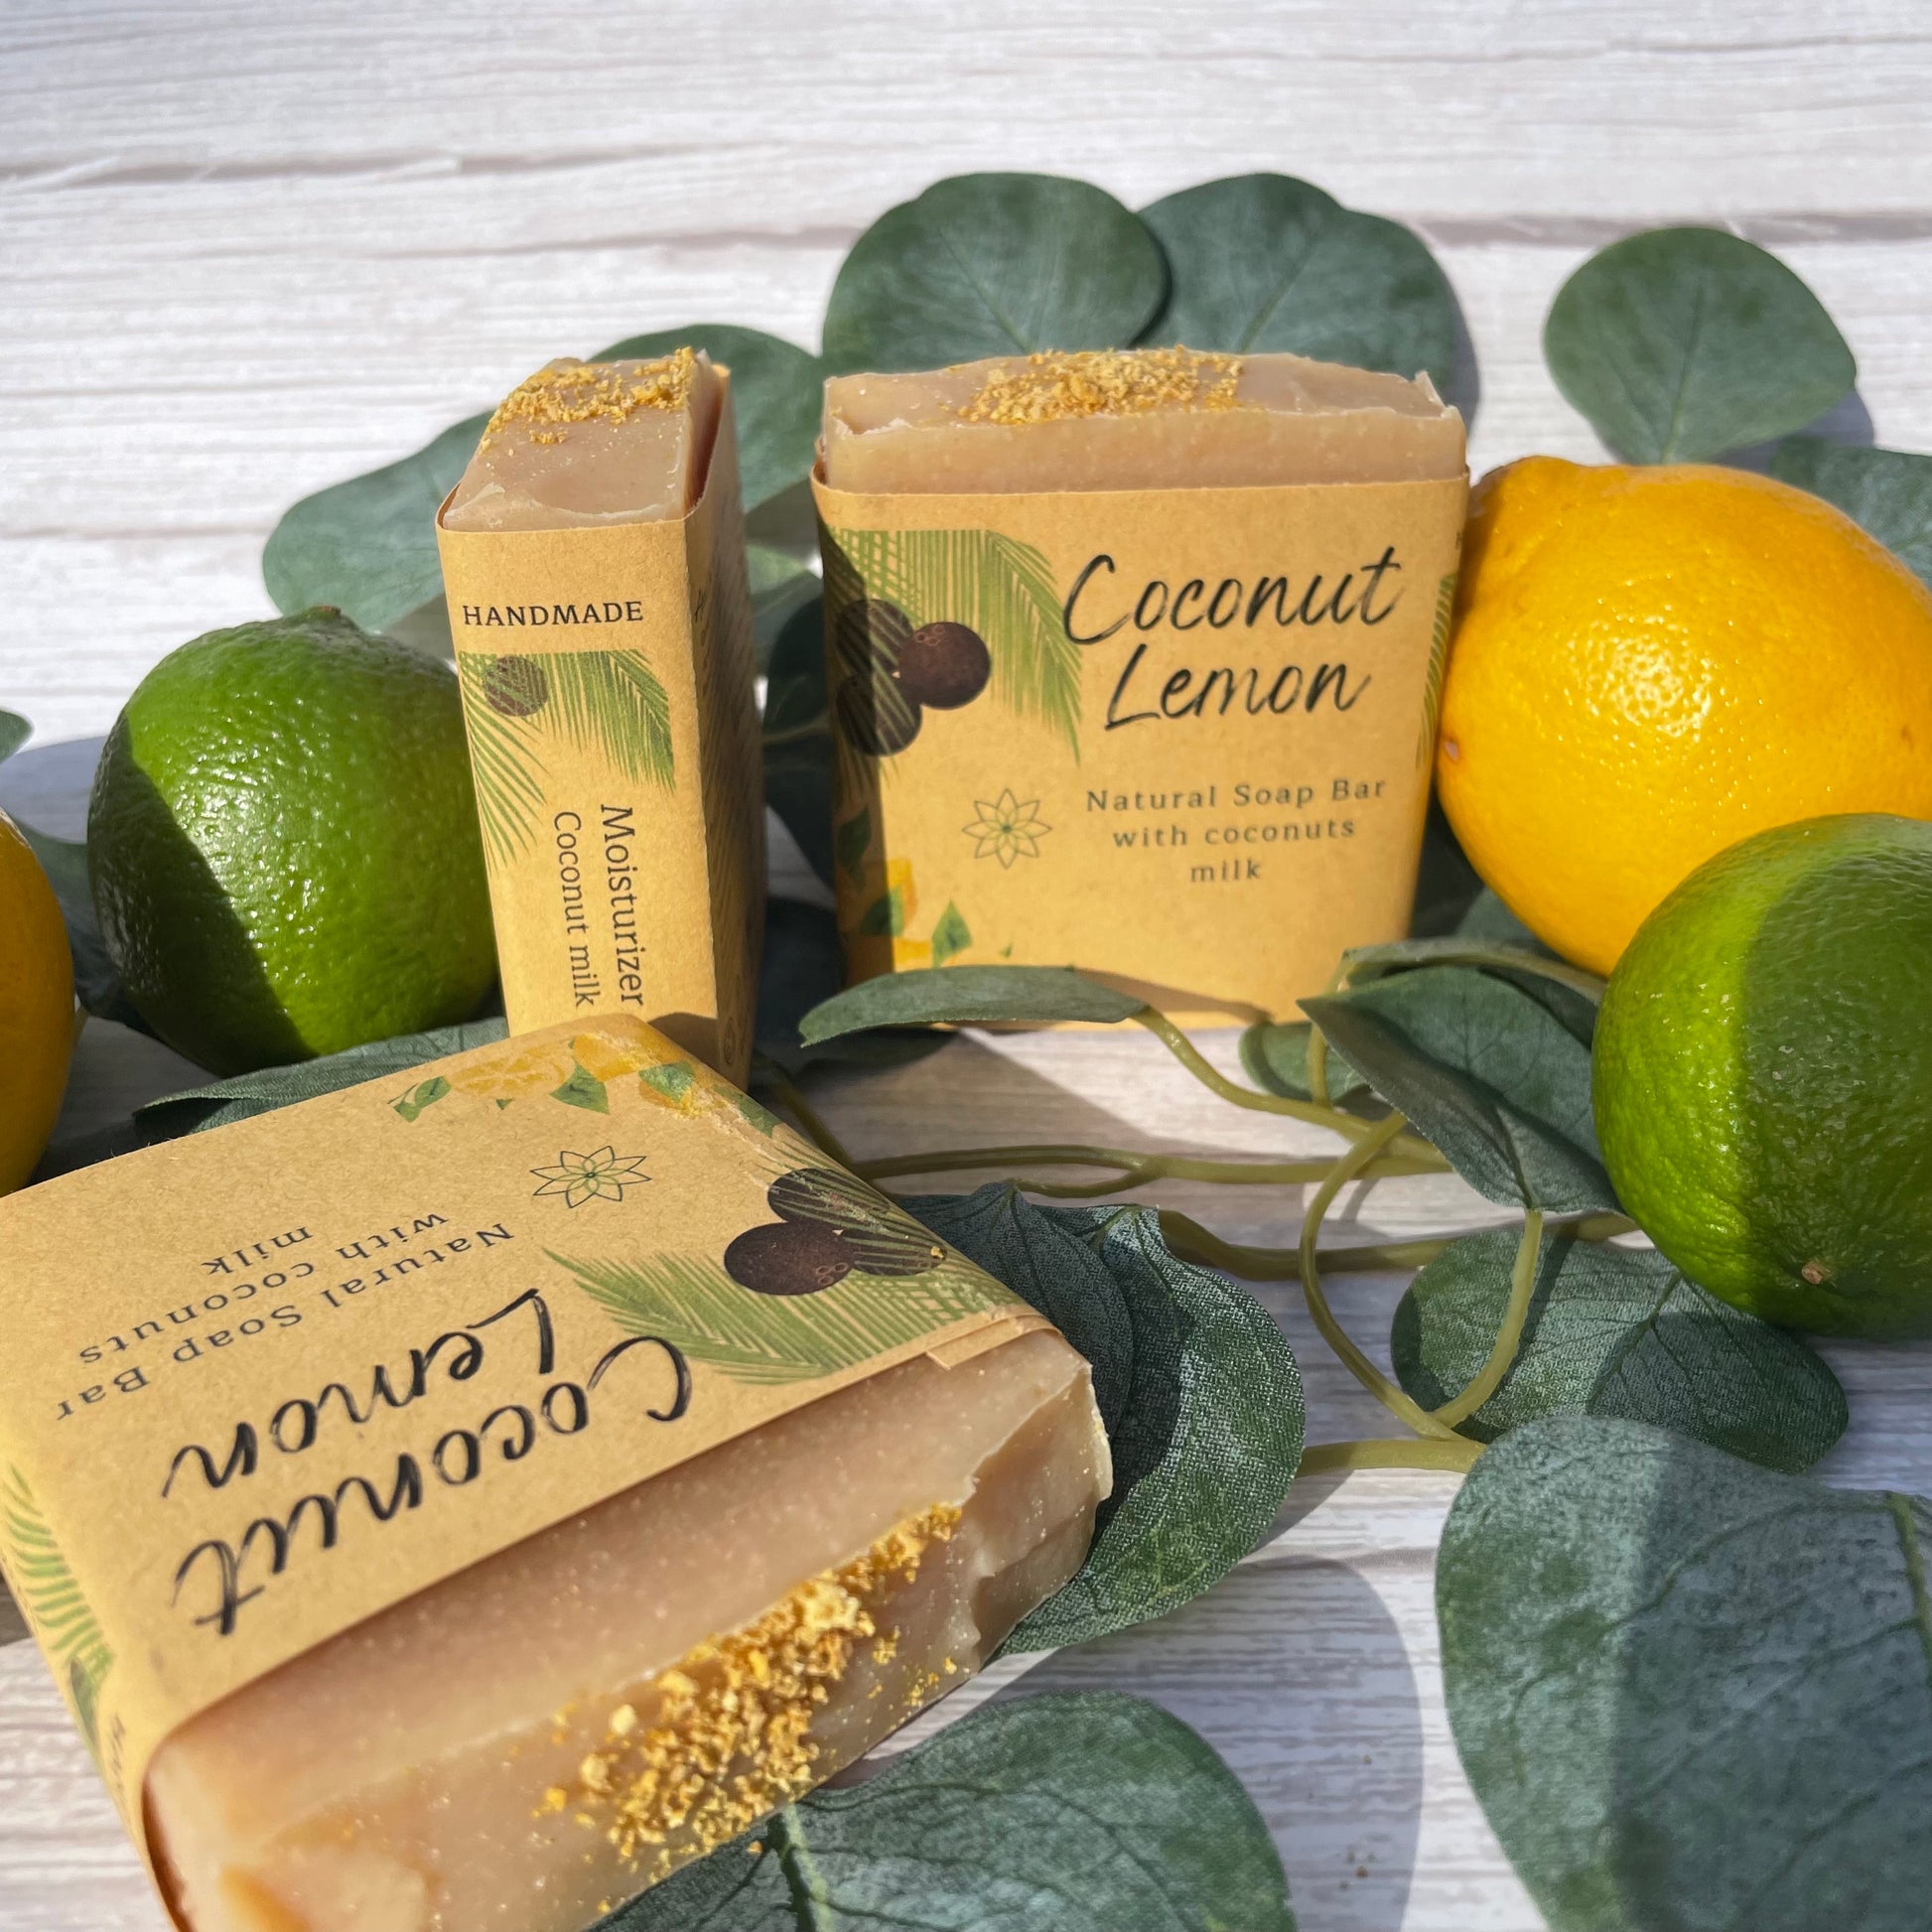 3 natural handcrafted coconut lemon soaps showing all sides, beautiful top, front and side labels, in the picture there are 4 lemon mix